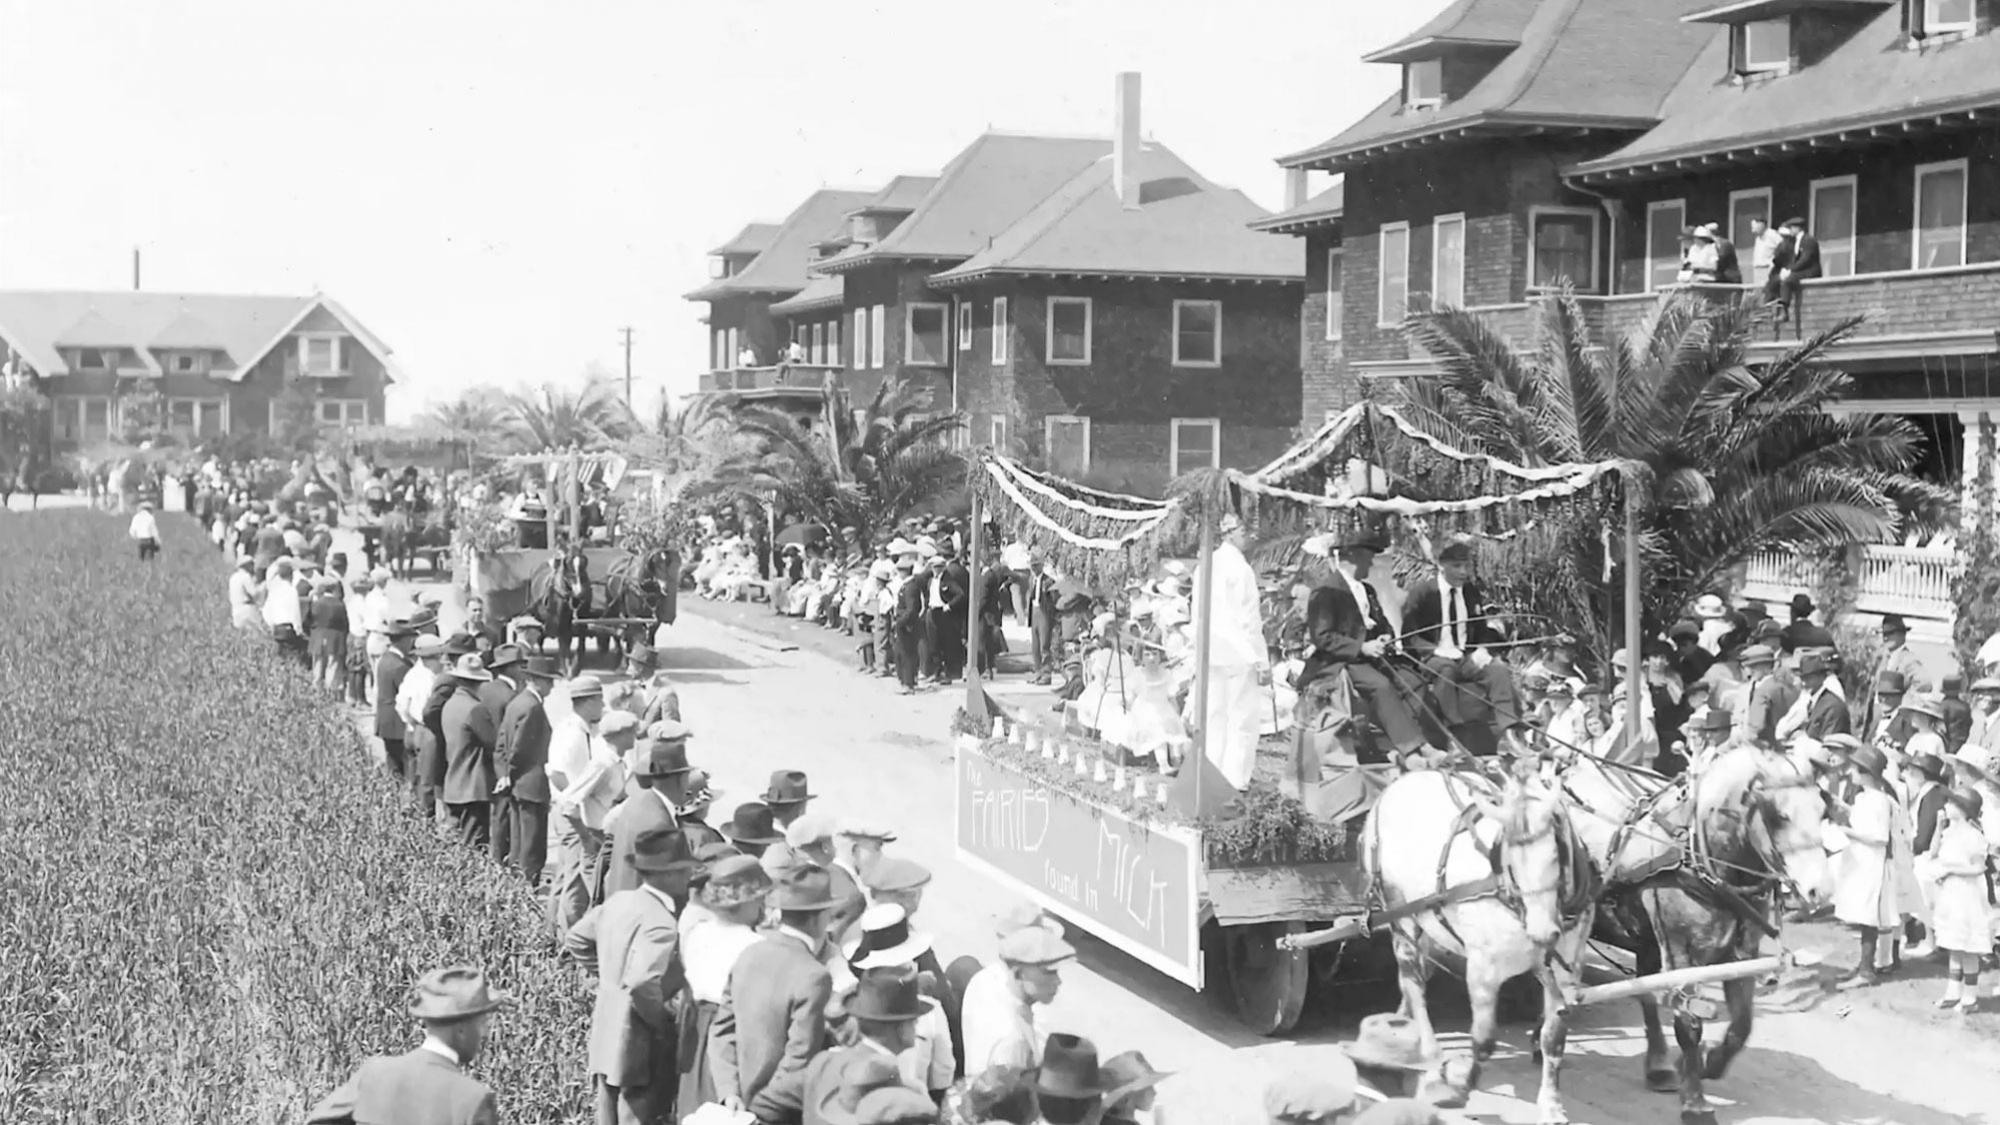 A scene of a 澳门六合彩开奖结果走势图 Picnic Day parade circa the turn of the 20th century